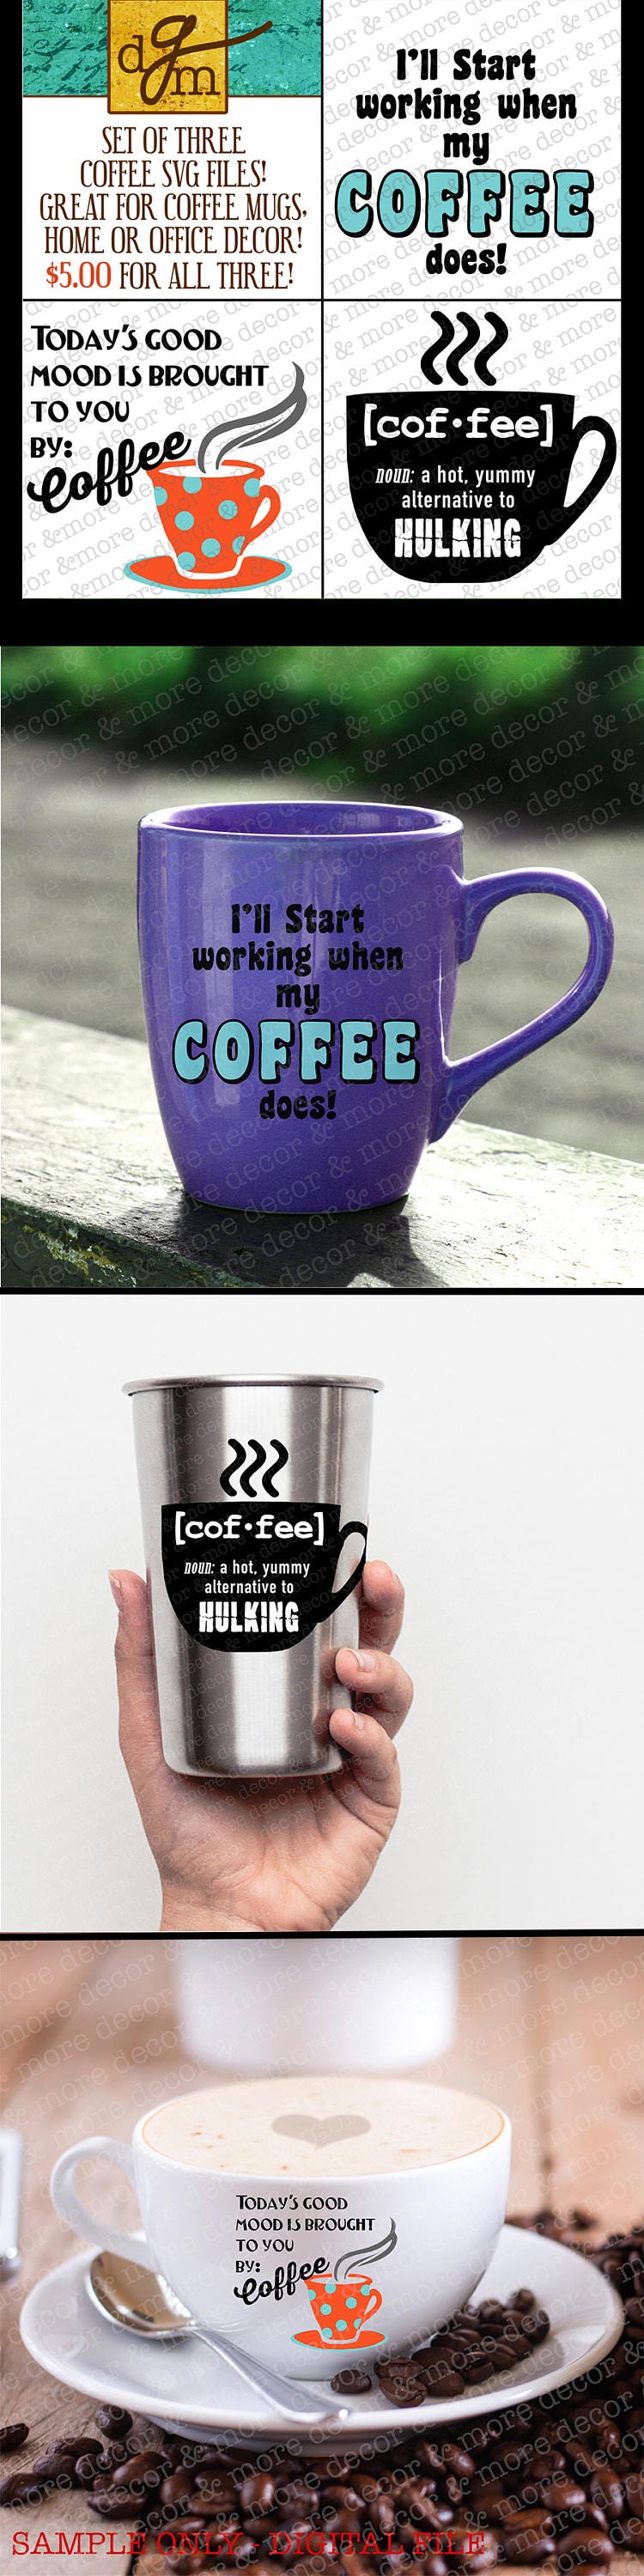 Download 3 Coffee Svg Files 3 Cute And Funny Coffee Svgs Great For Etsy